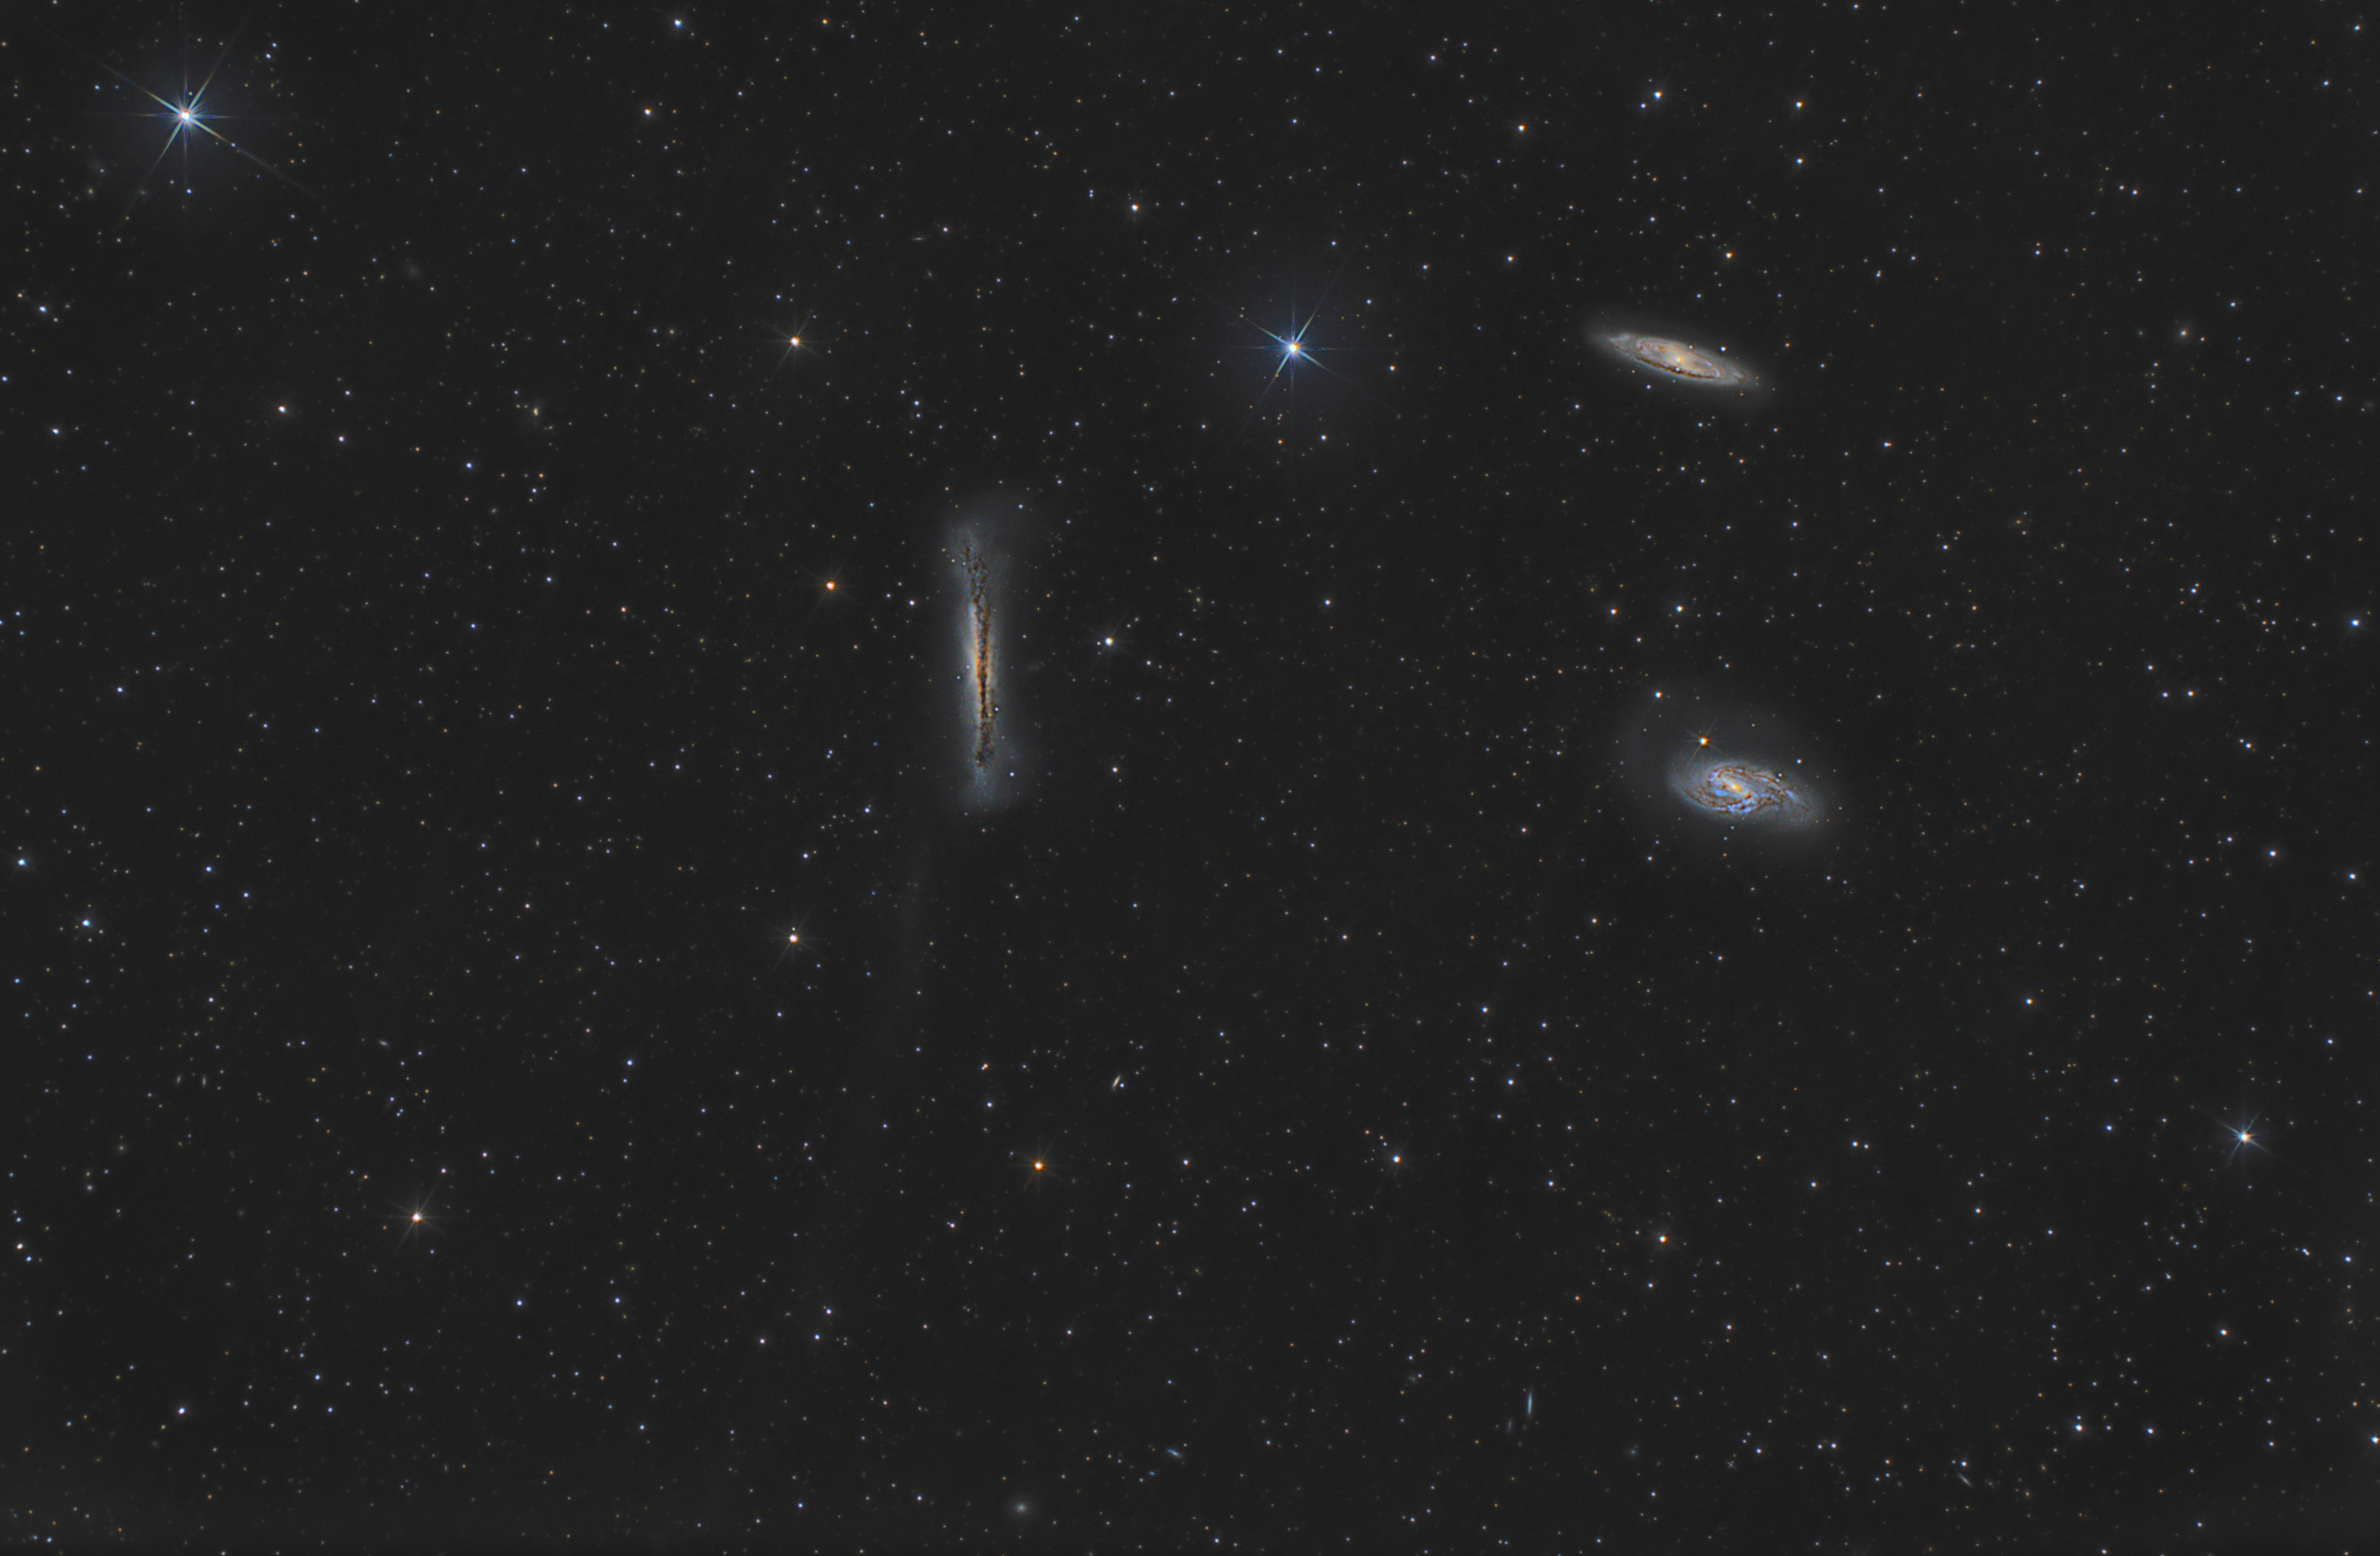 Leo Triplet with a DSLR – The hunt for the Tidal Tail